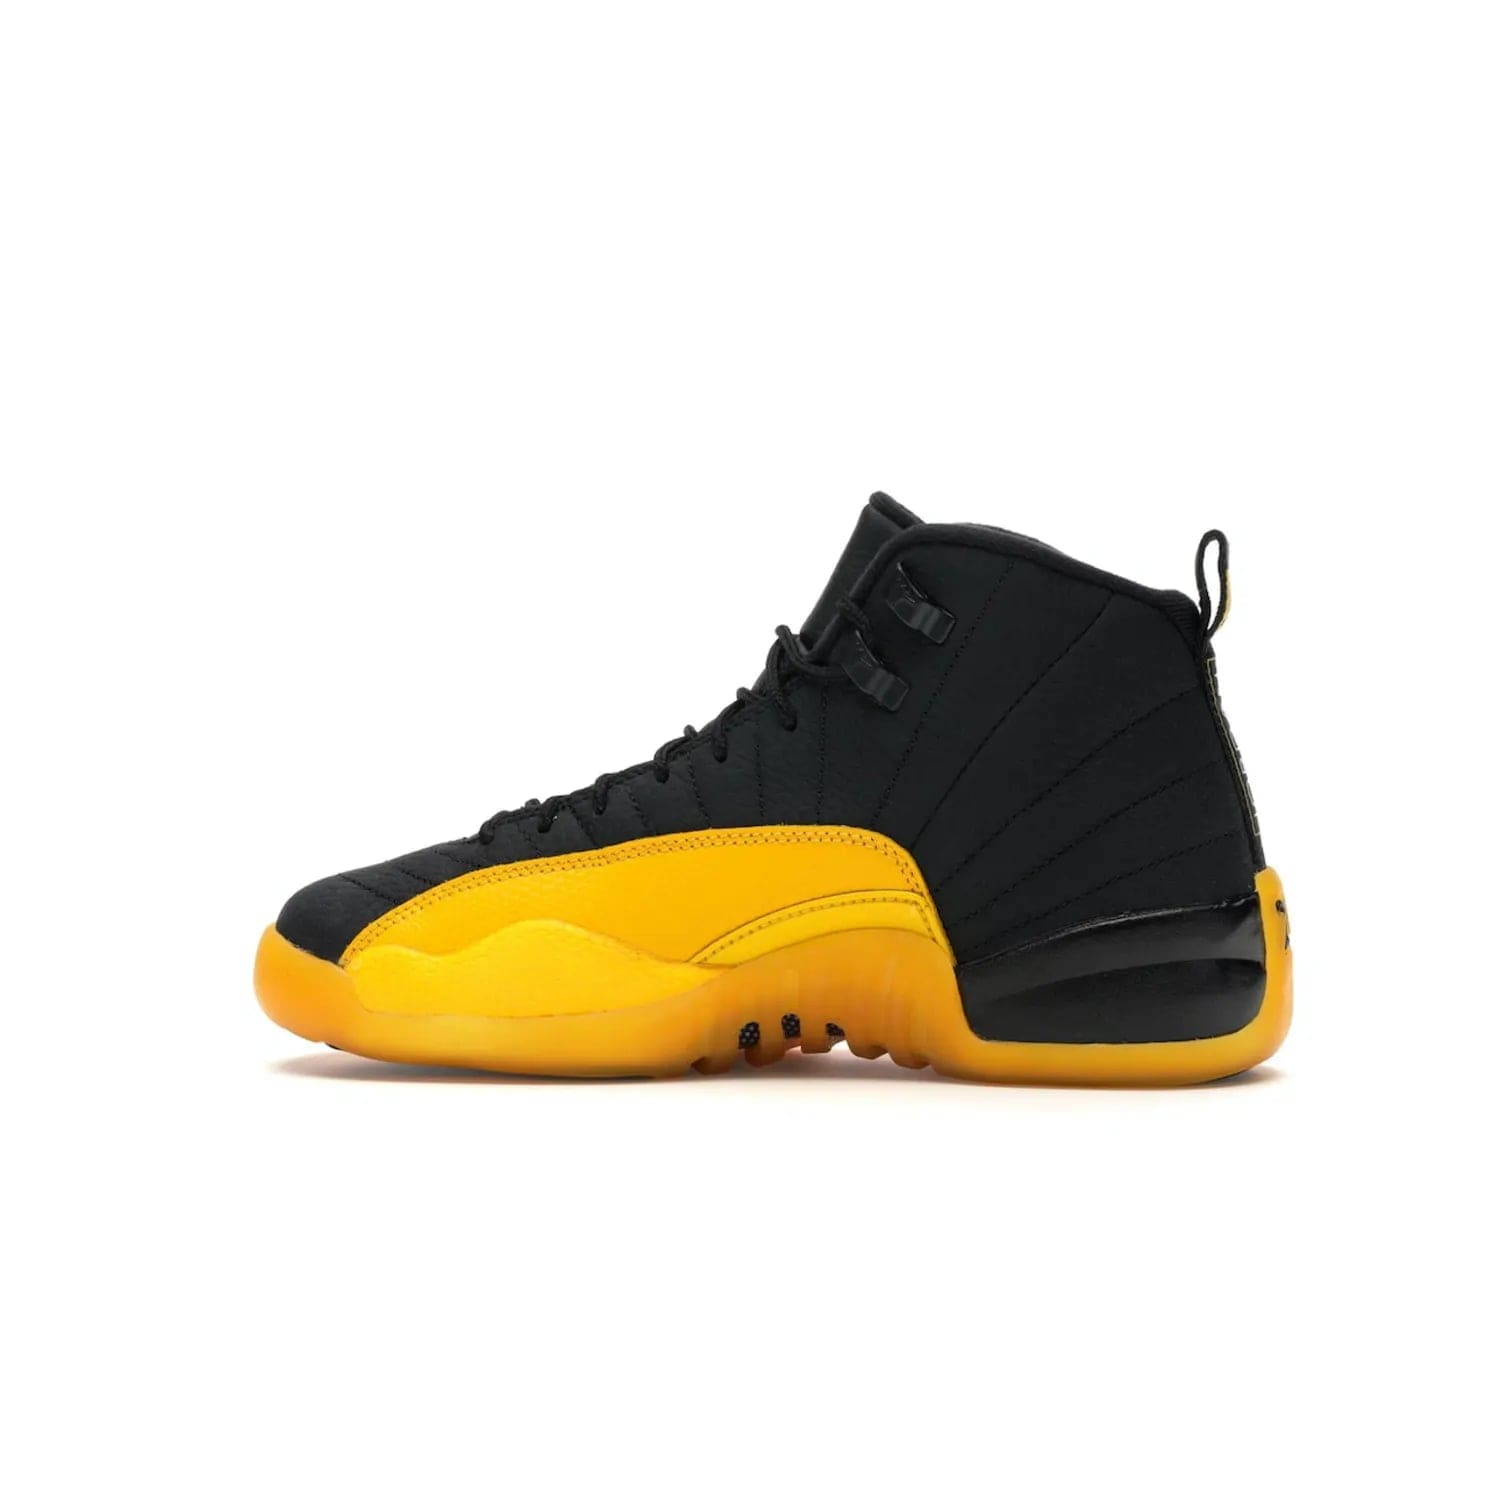 Jordan 12 Retro Black University Gold (GS) - Image 20 - Only at www.BallersClubKickz.com - Upgrade your kid's shoe collection with the Jordan 12 Retro Black University Gold. With classic style, black tumbled leather upper, and University Gold accents, it's a great summer look. Out July 2020.